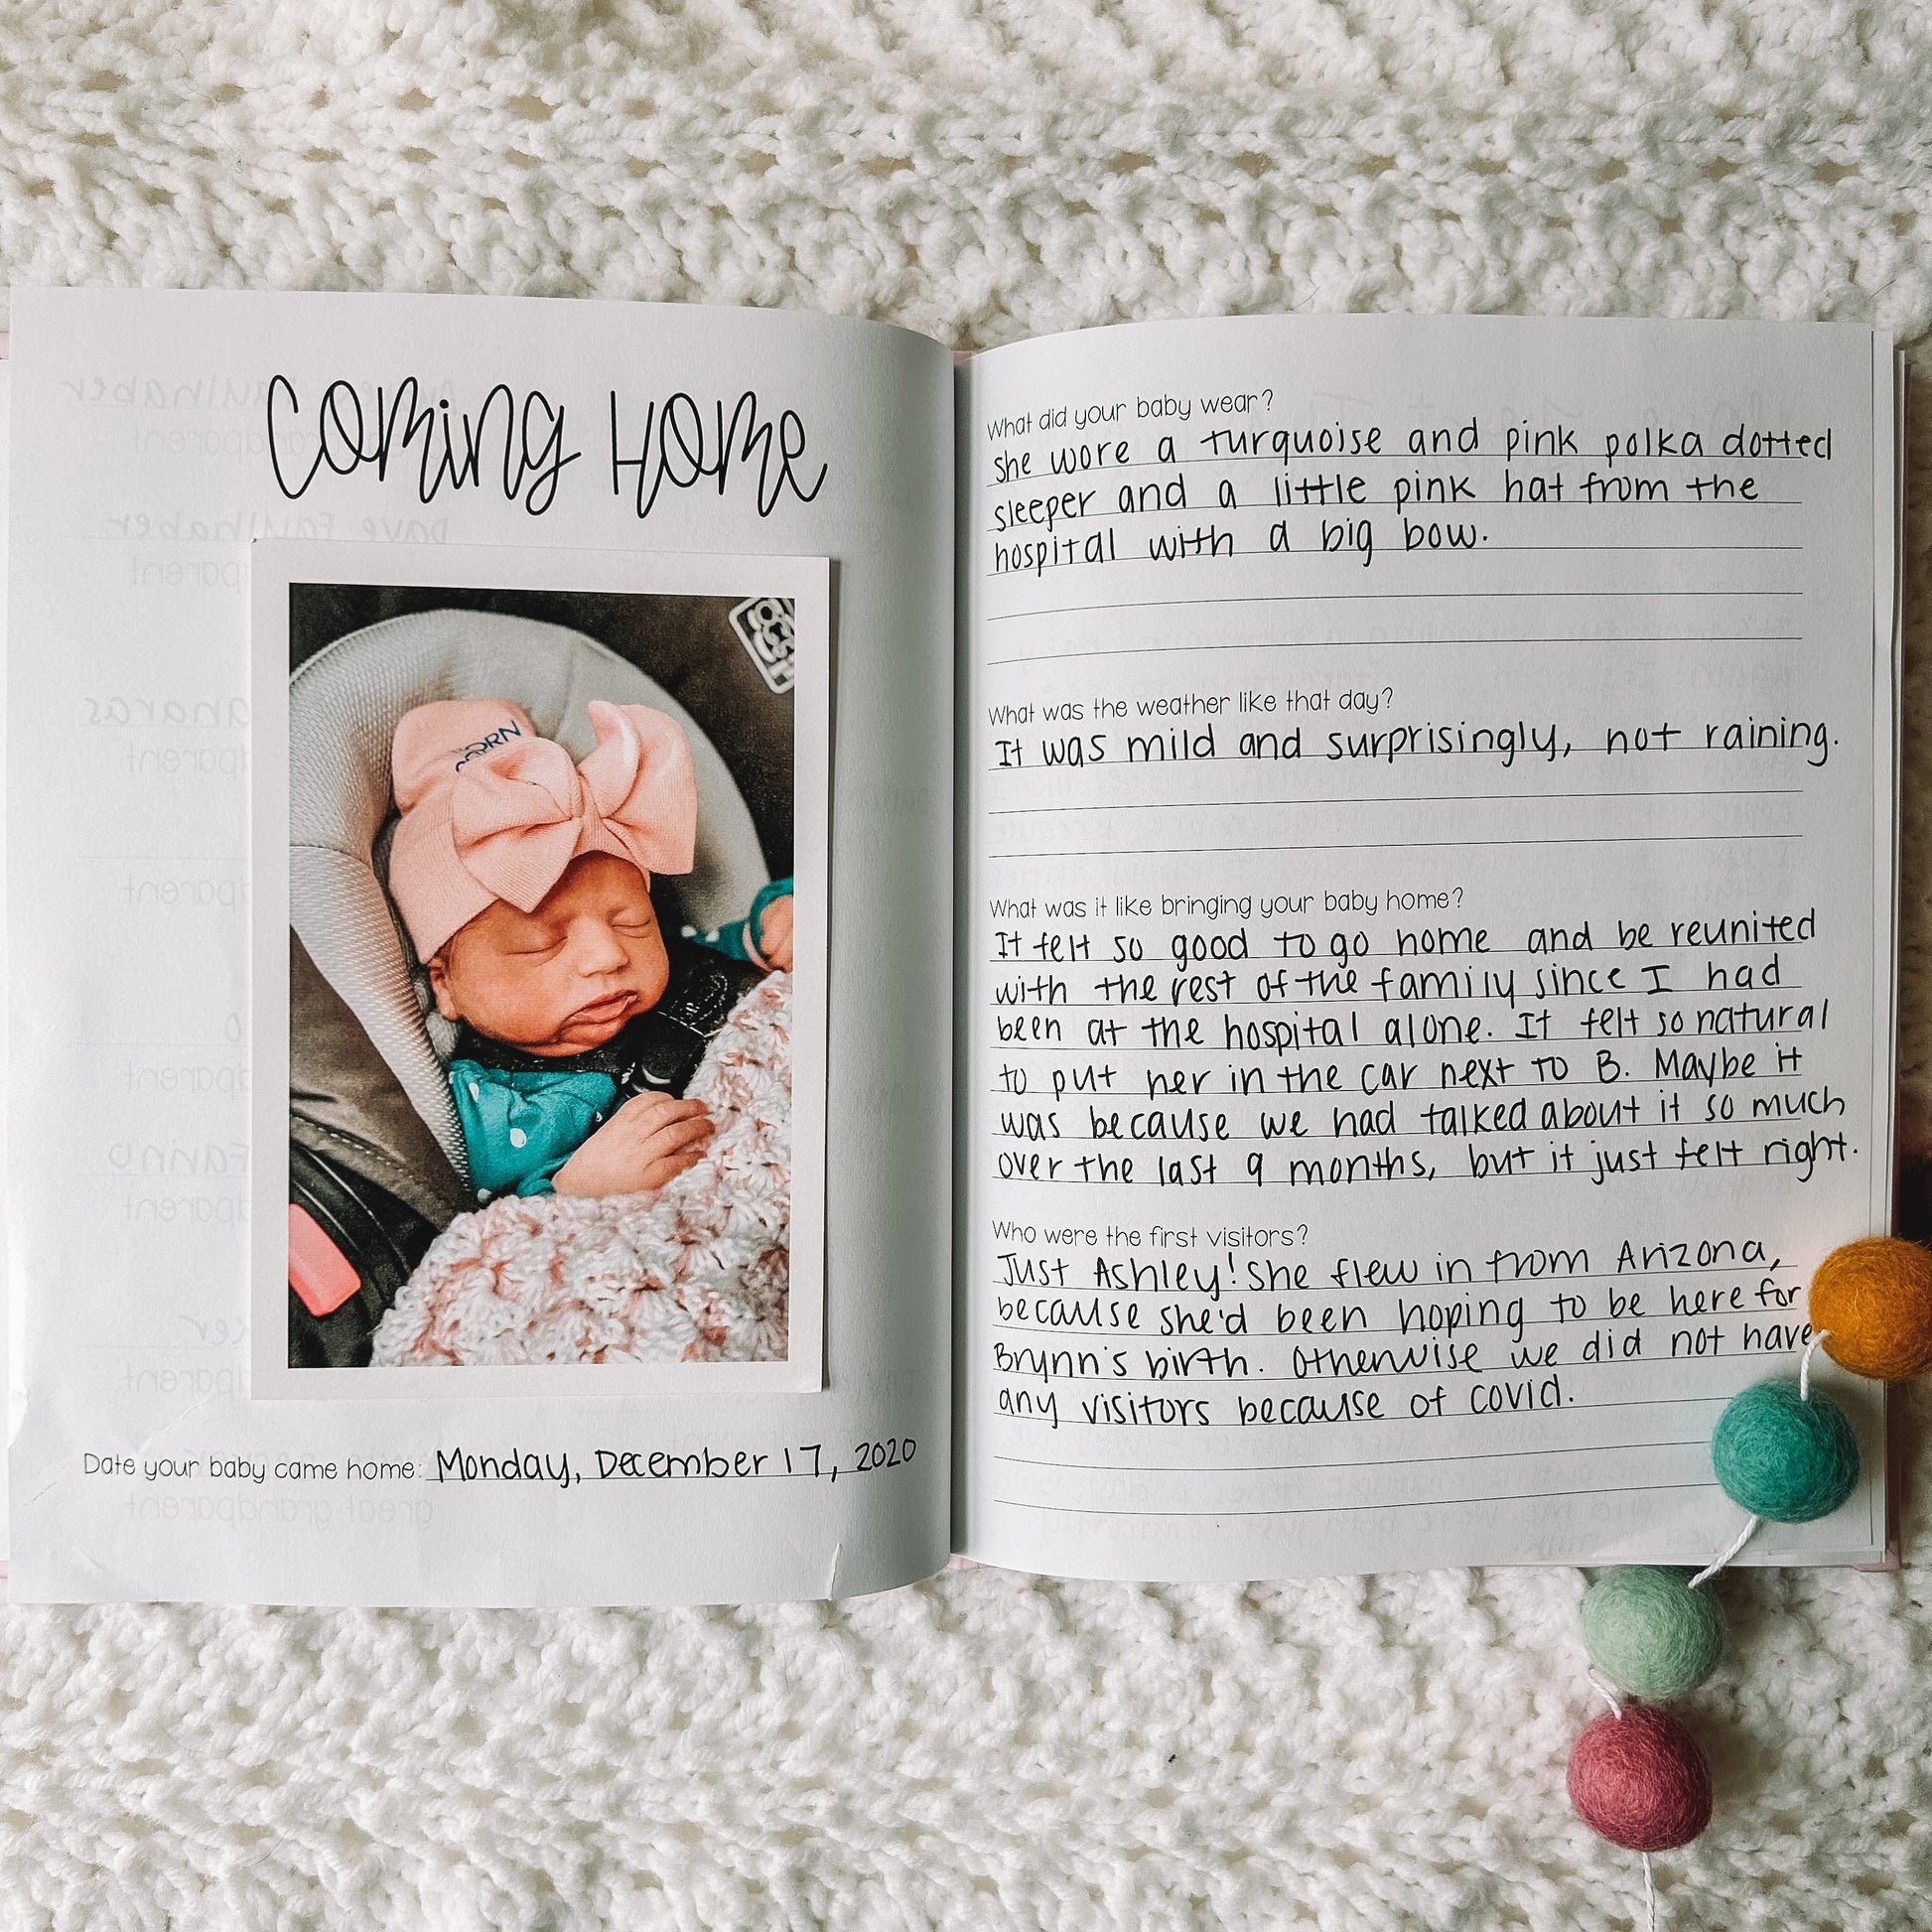 Two page spread about baby coming home includes a space for a picture and four prompts about the day.